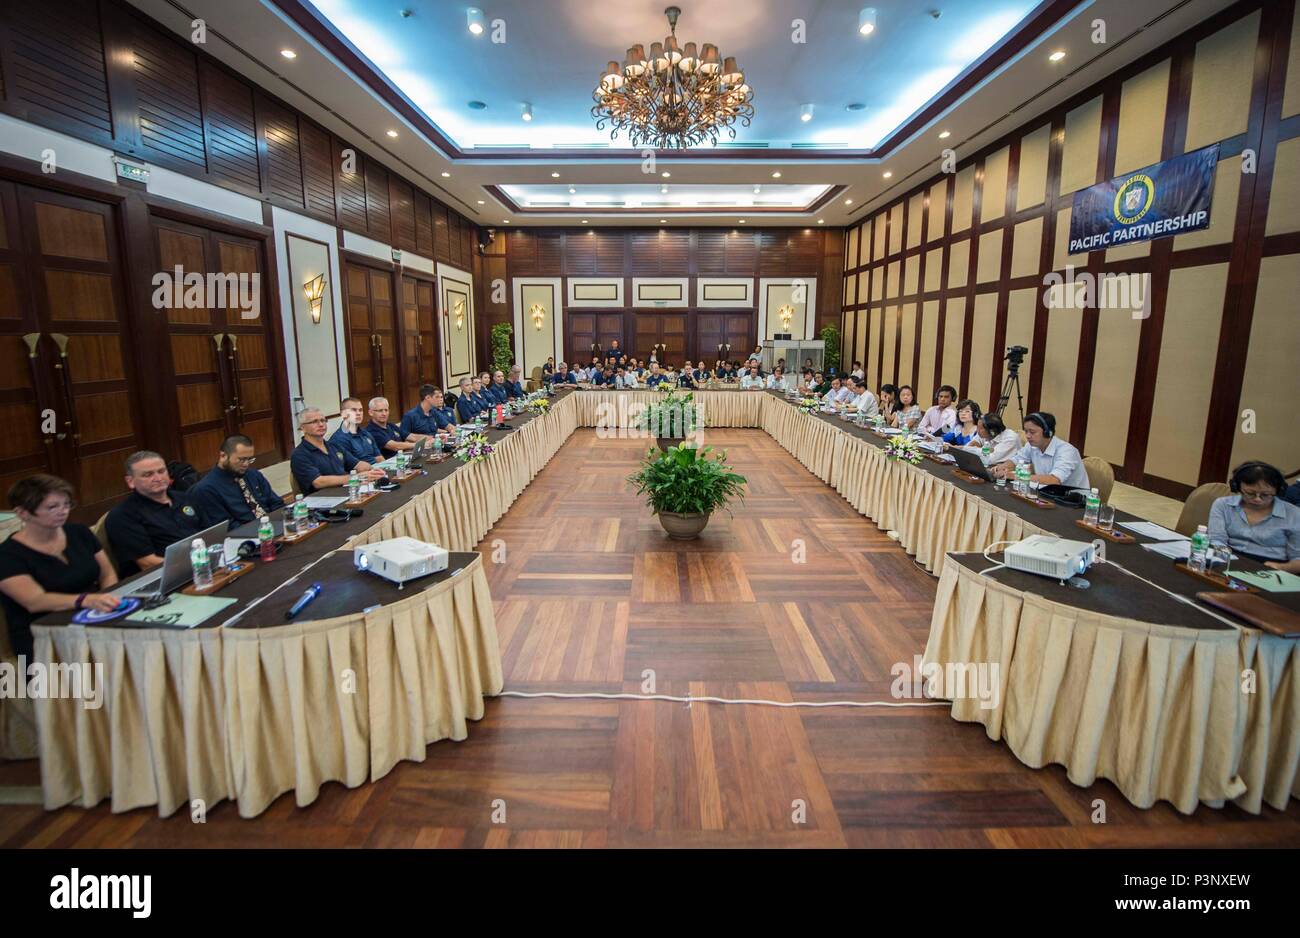 160719-N-QW941-141 DA NANG, Vietnam (July 19, 2016) Pacific Partnership 2016 personnel assigned to USNS Mercy (T-AH 19) sit with Vietnamese government officials and local authorities during a Pacific Partnership 2016 collaborative disaster preparedness and response seminar. During the seminar, participants introduced themselves, shared ideas, real world experiences and possible solutions if a disaster were to strike. Mercy is joined in Da Nang by JS Shimokita (LST-4002) and Vietnam People's Navy ship Khánh Hóa for Pacific Partnership. Partner nations will work side-by-side with local organizat Stock Photo